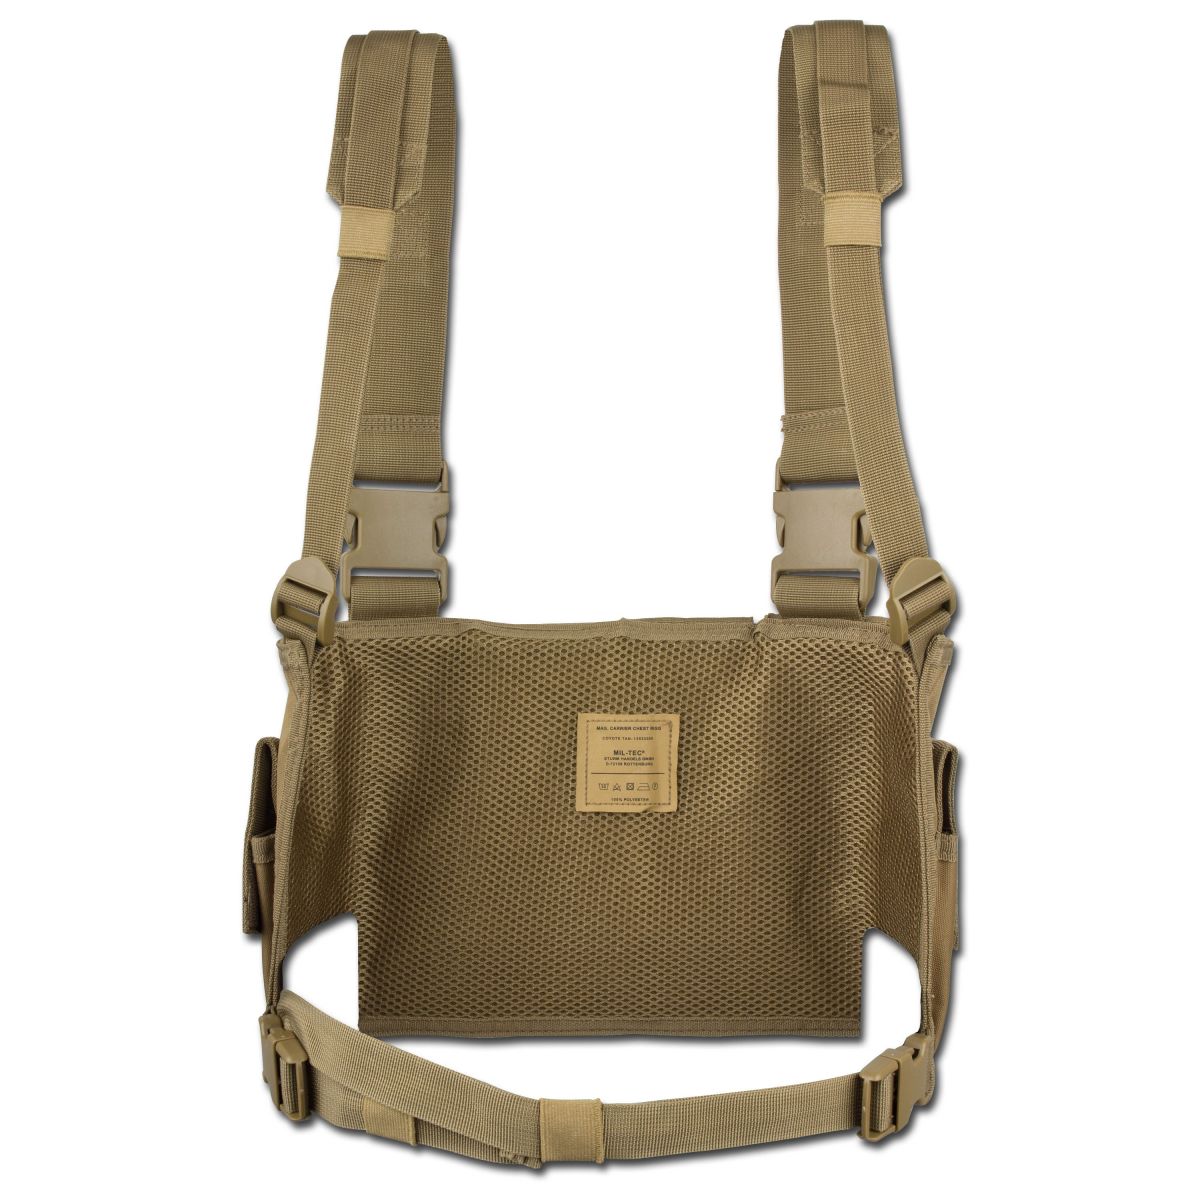 Mag Carrier Chest Rig coyote | Mag Carrier Chest Rig coyote | Chest ...